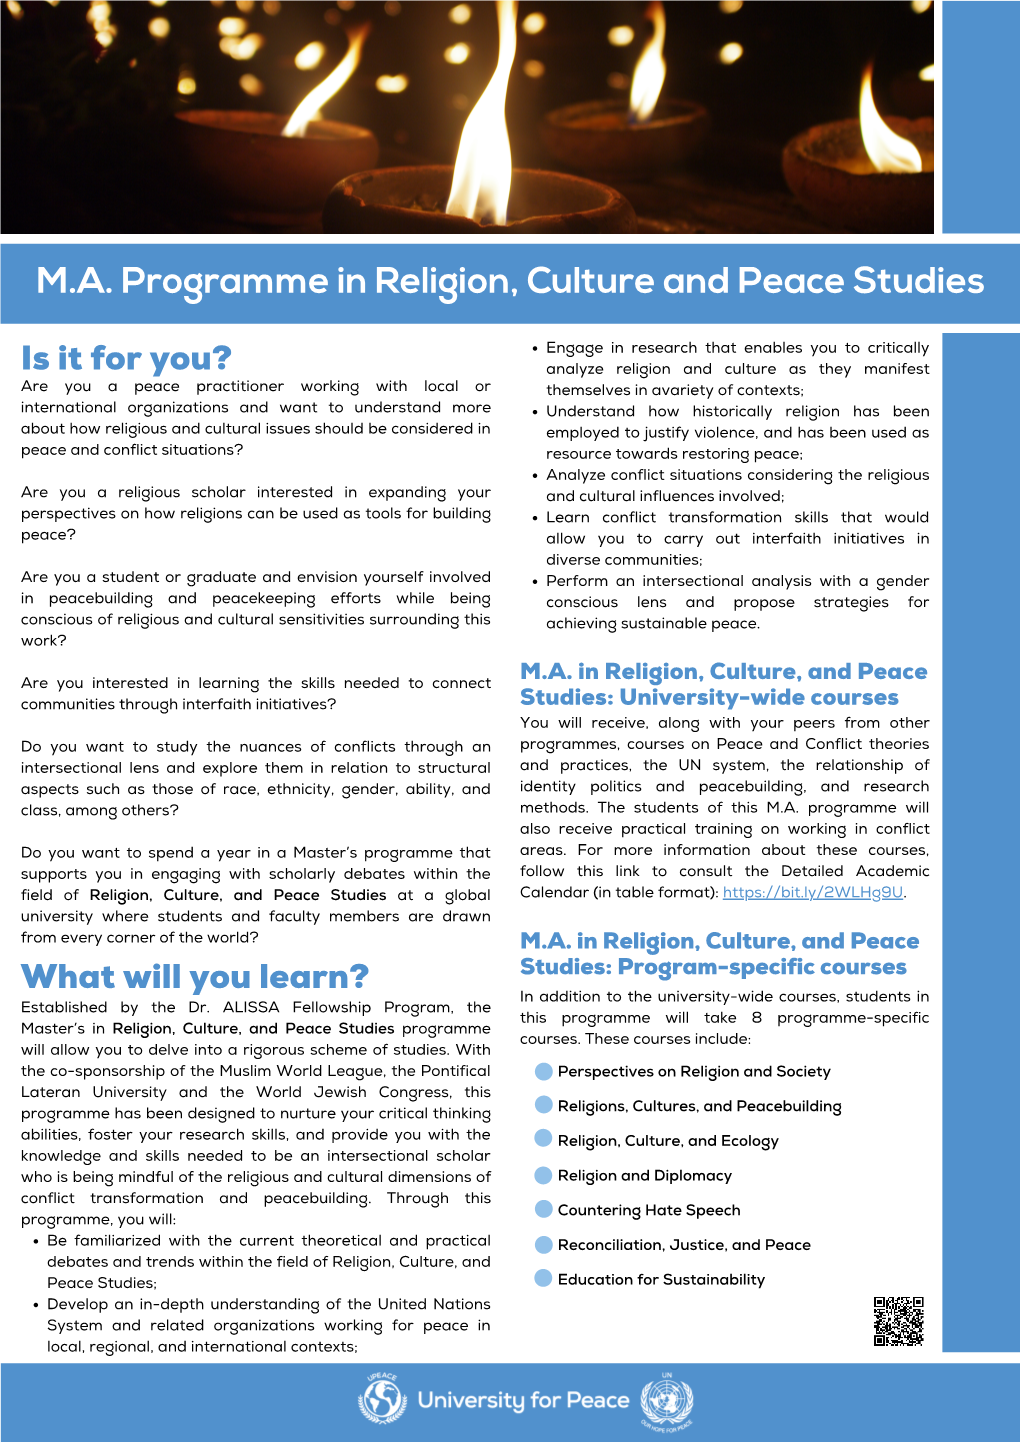 MA Programme in Religion, Culture and Peace Studies